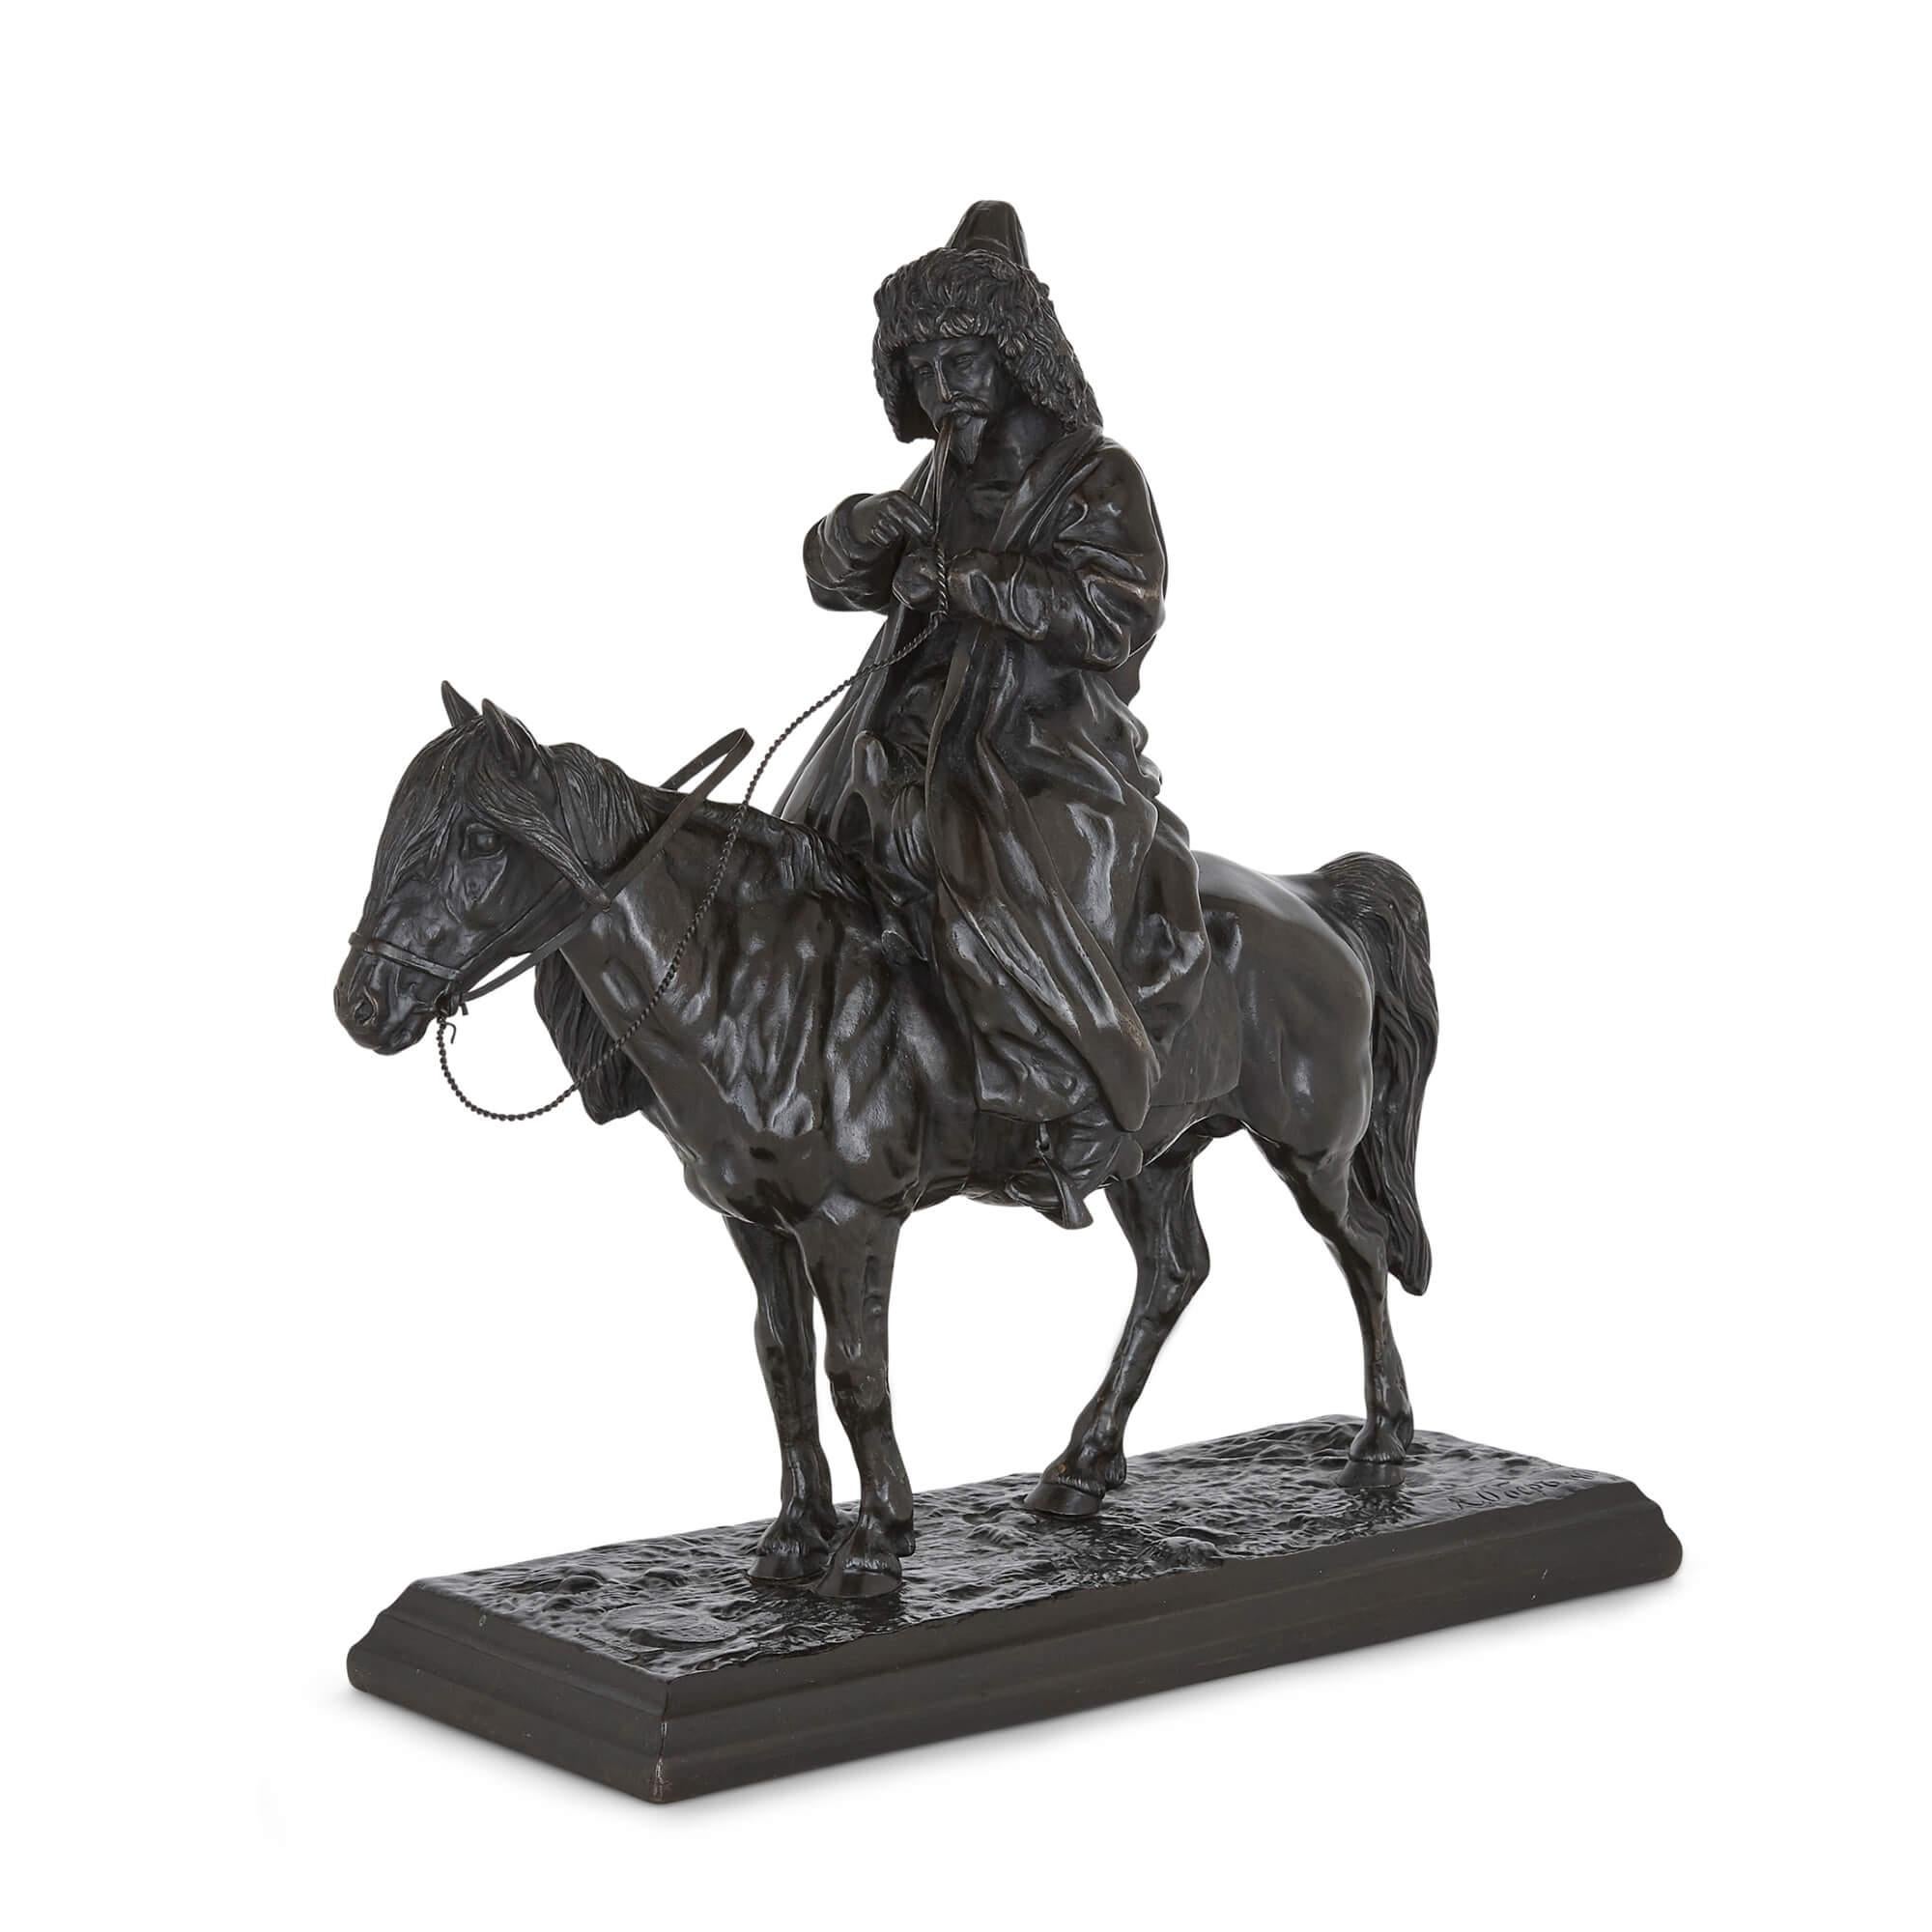 Russian cast iron equestrian sculpture of a Cossack soldier
Russian, 1872
Height 38cm, width 37cm, depth 14cm

This fine Russian equestrian cast iron sculpture depicts a Cossack soldier on horseback. The soldier, garbed in a heavy overcoat, holds